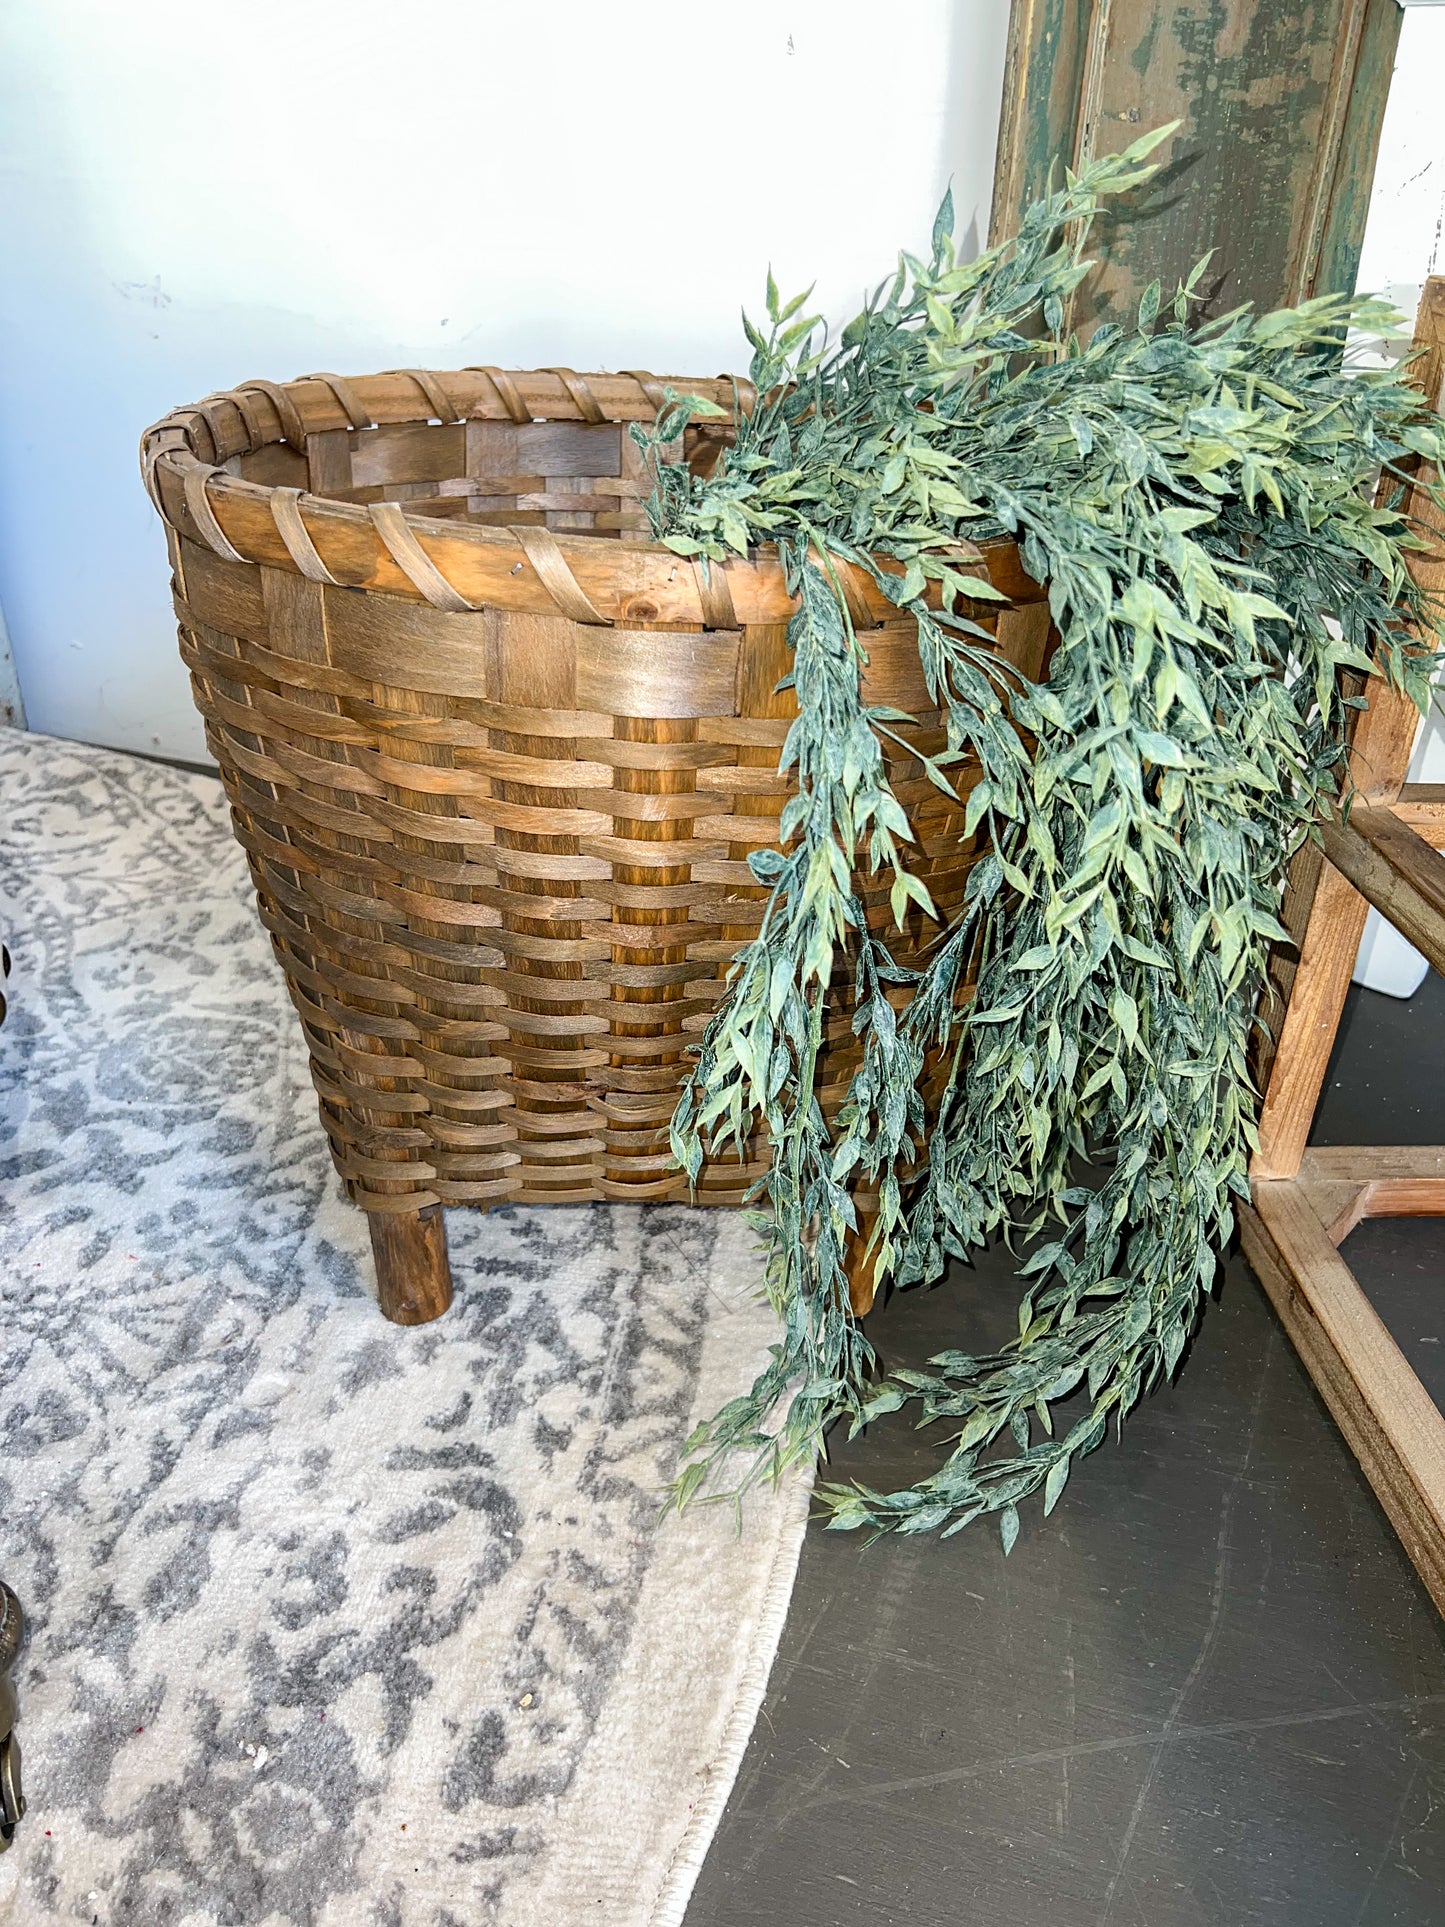 Basket with wooden feet